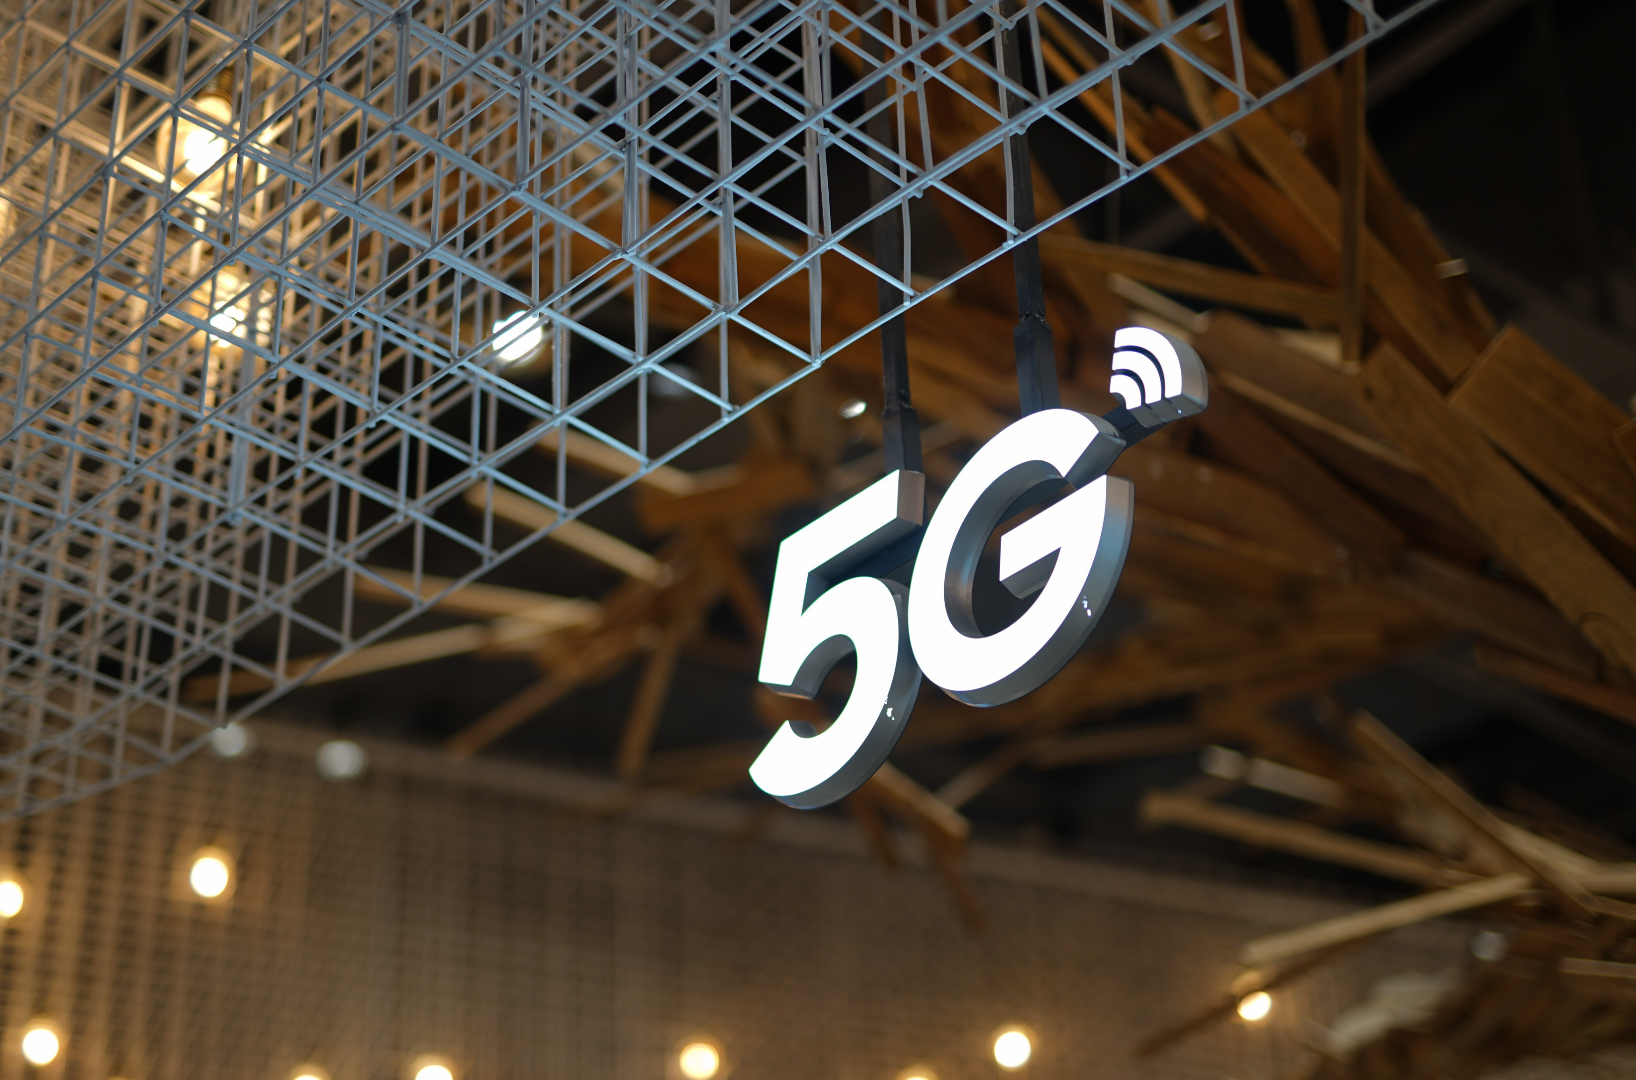 Government's 5G commitment: no extra charges to enhance people's lives